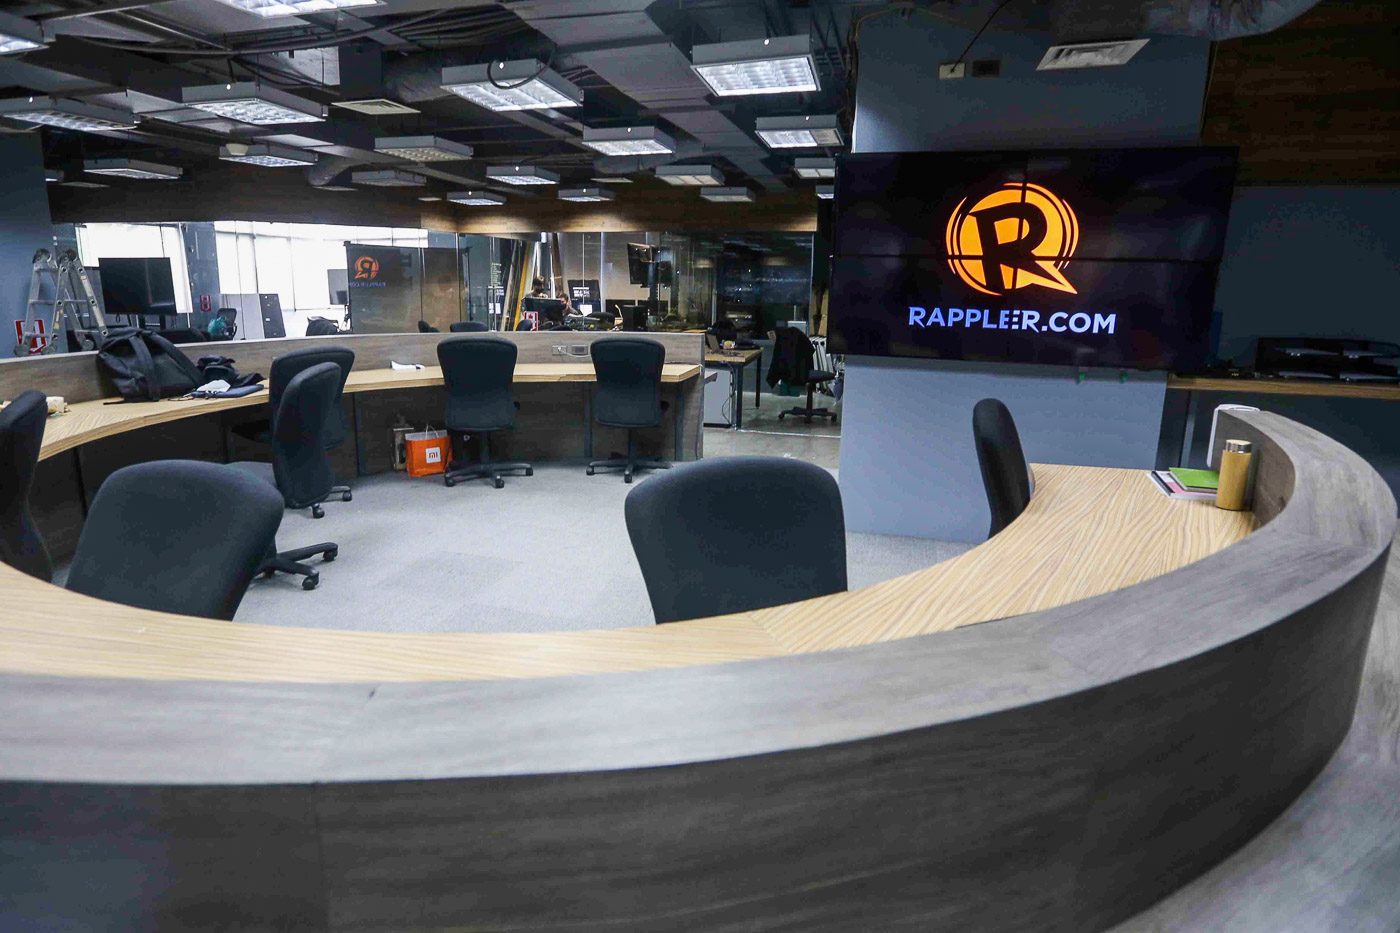 Media, rights groups stand behind Rappler after SEC’s latest closure move